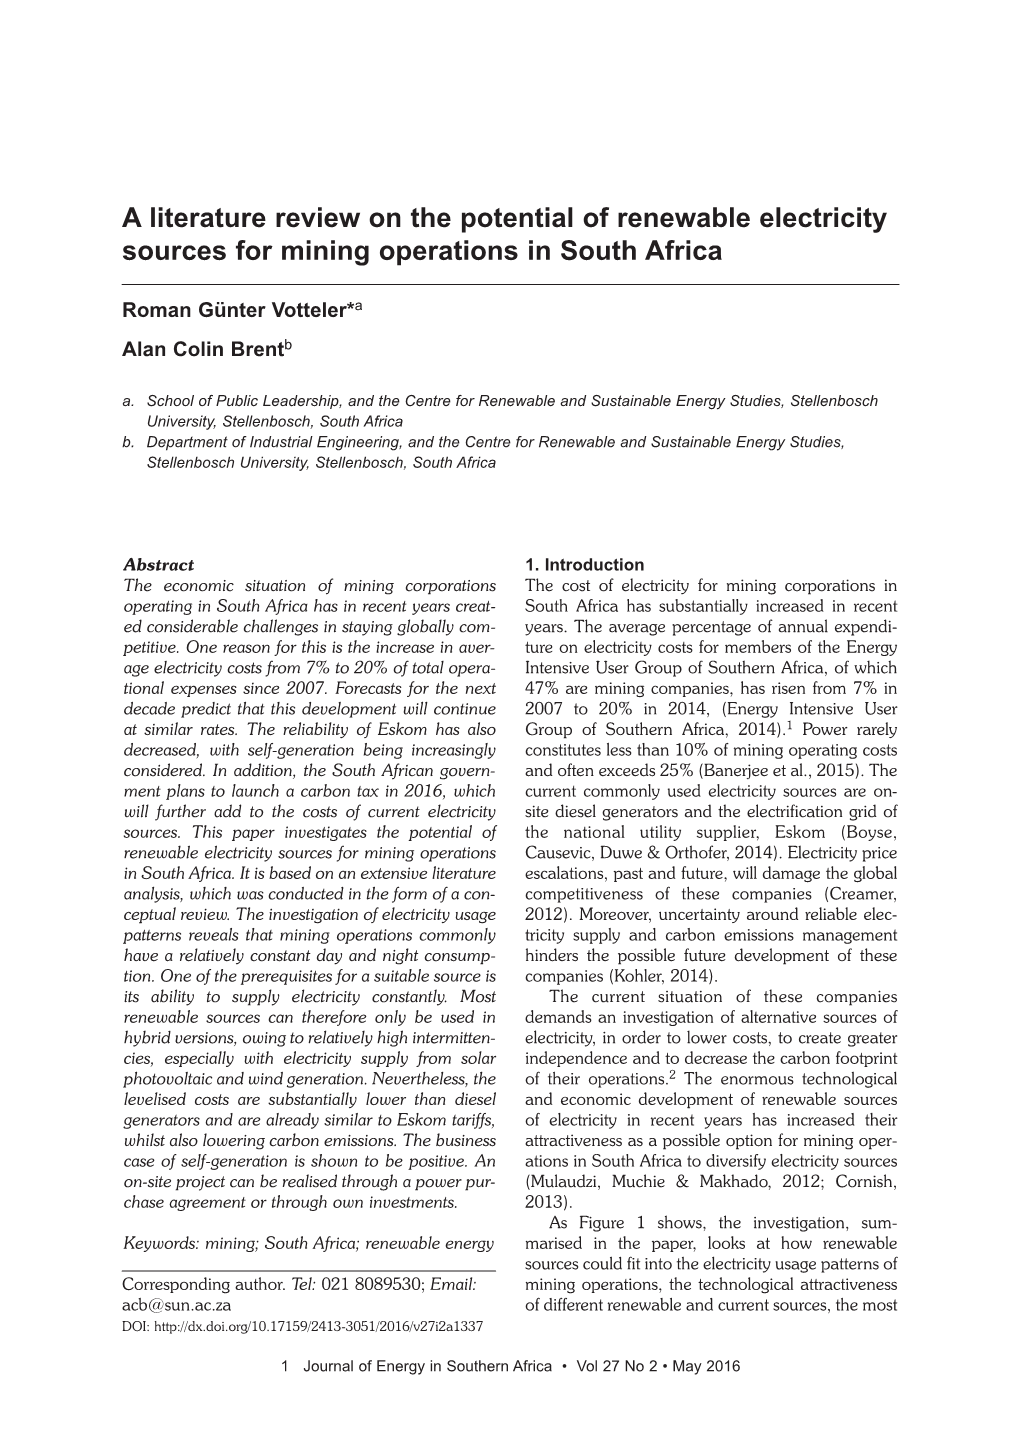 A Literature Review on the Potential of Renewable Electricity Sources for Mining Operations in South Africa